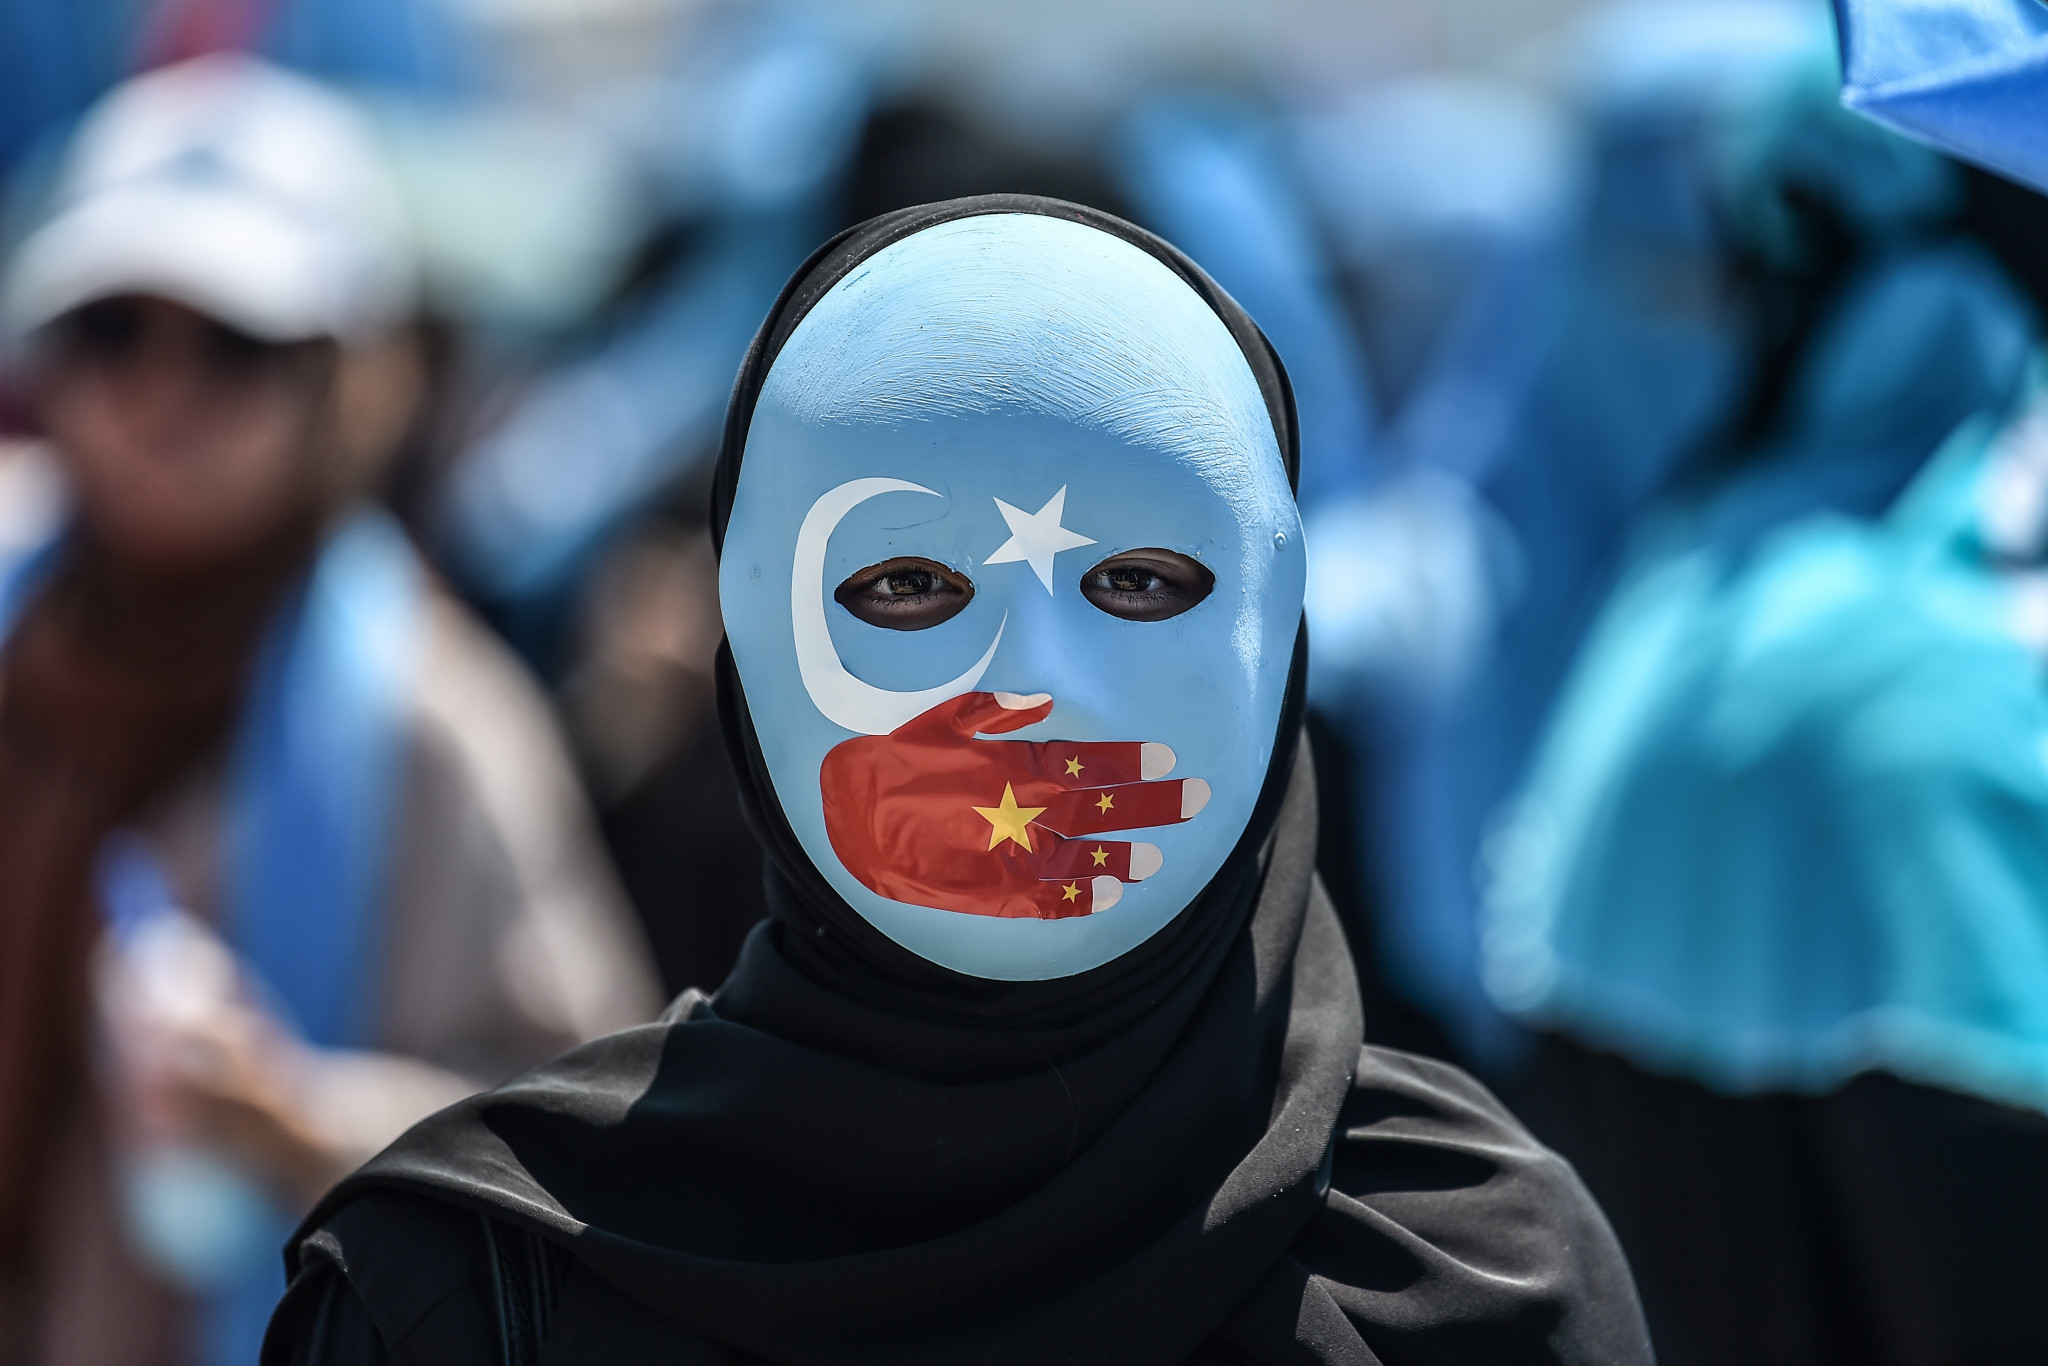 China's treatment of Uyghur Muslims has led to international condemnation ©Getty Images